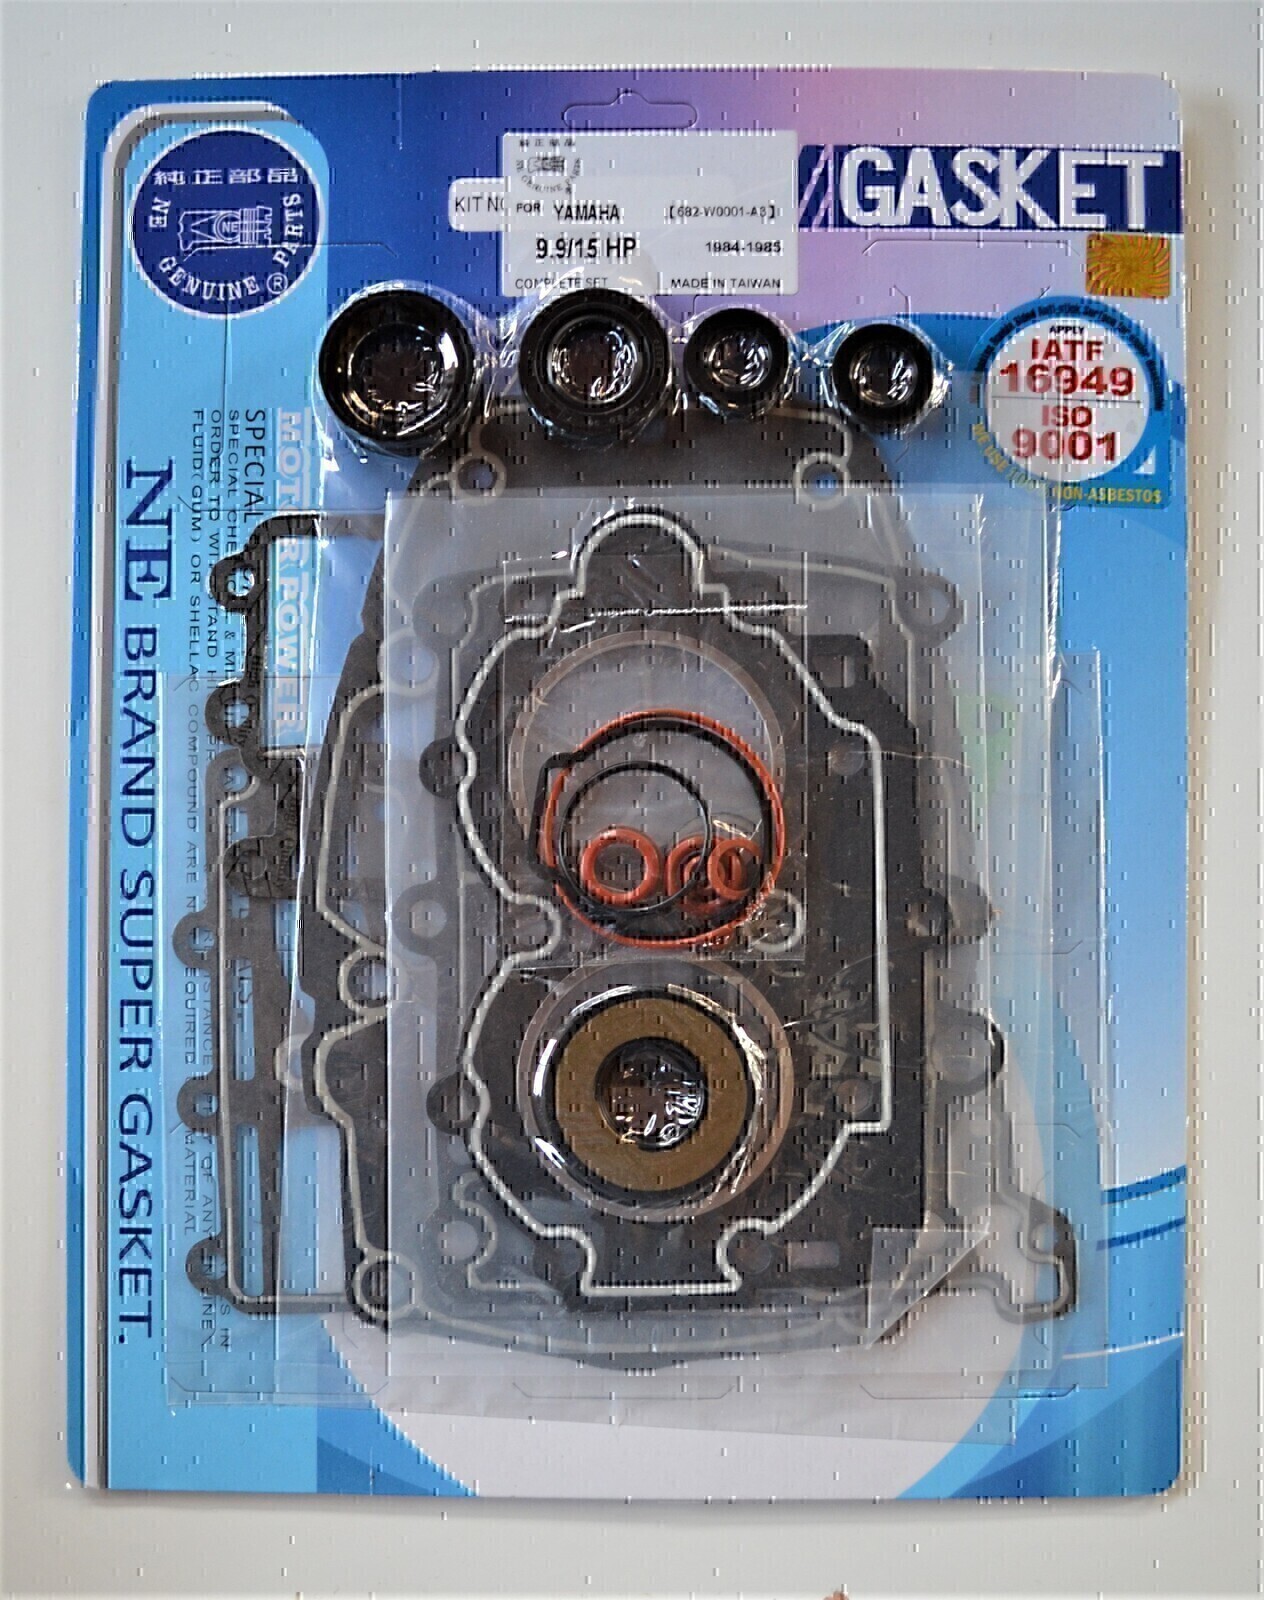 COMPLETE GASKET & OIL SEAL KIT FOR YAMAHA 2 CYL 9.9 - 15HP OUTBOARD MOTOR